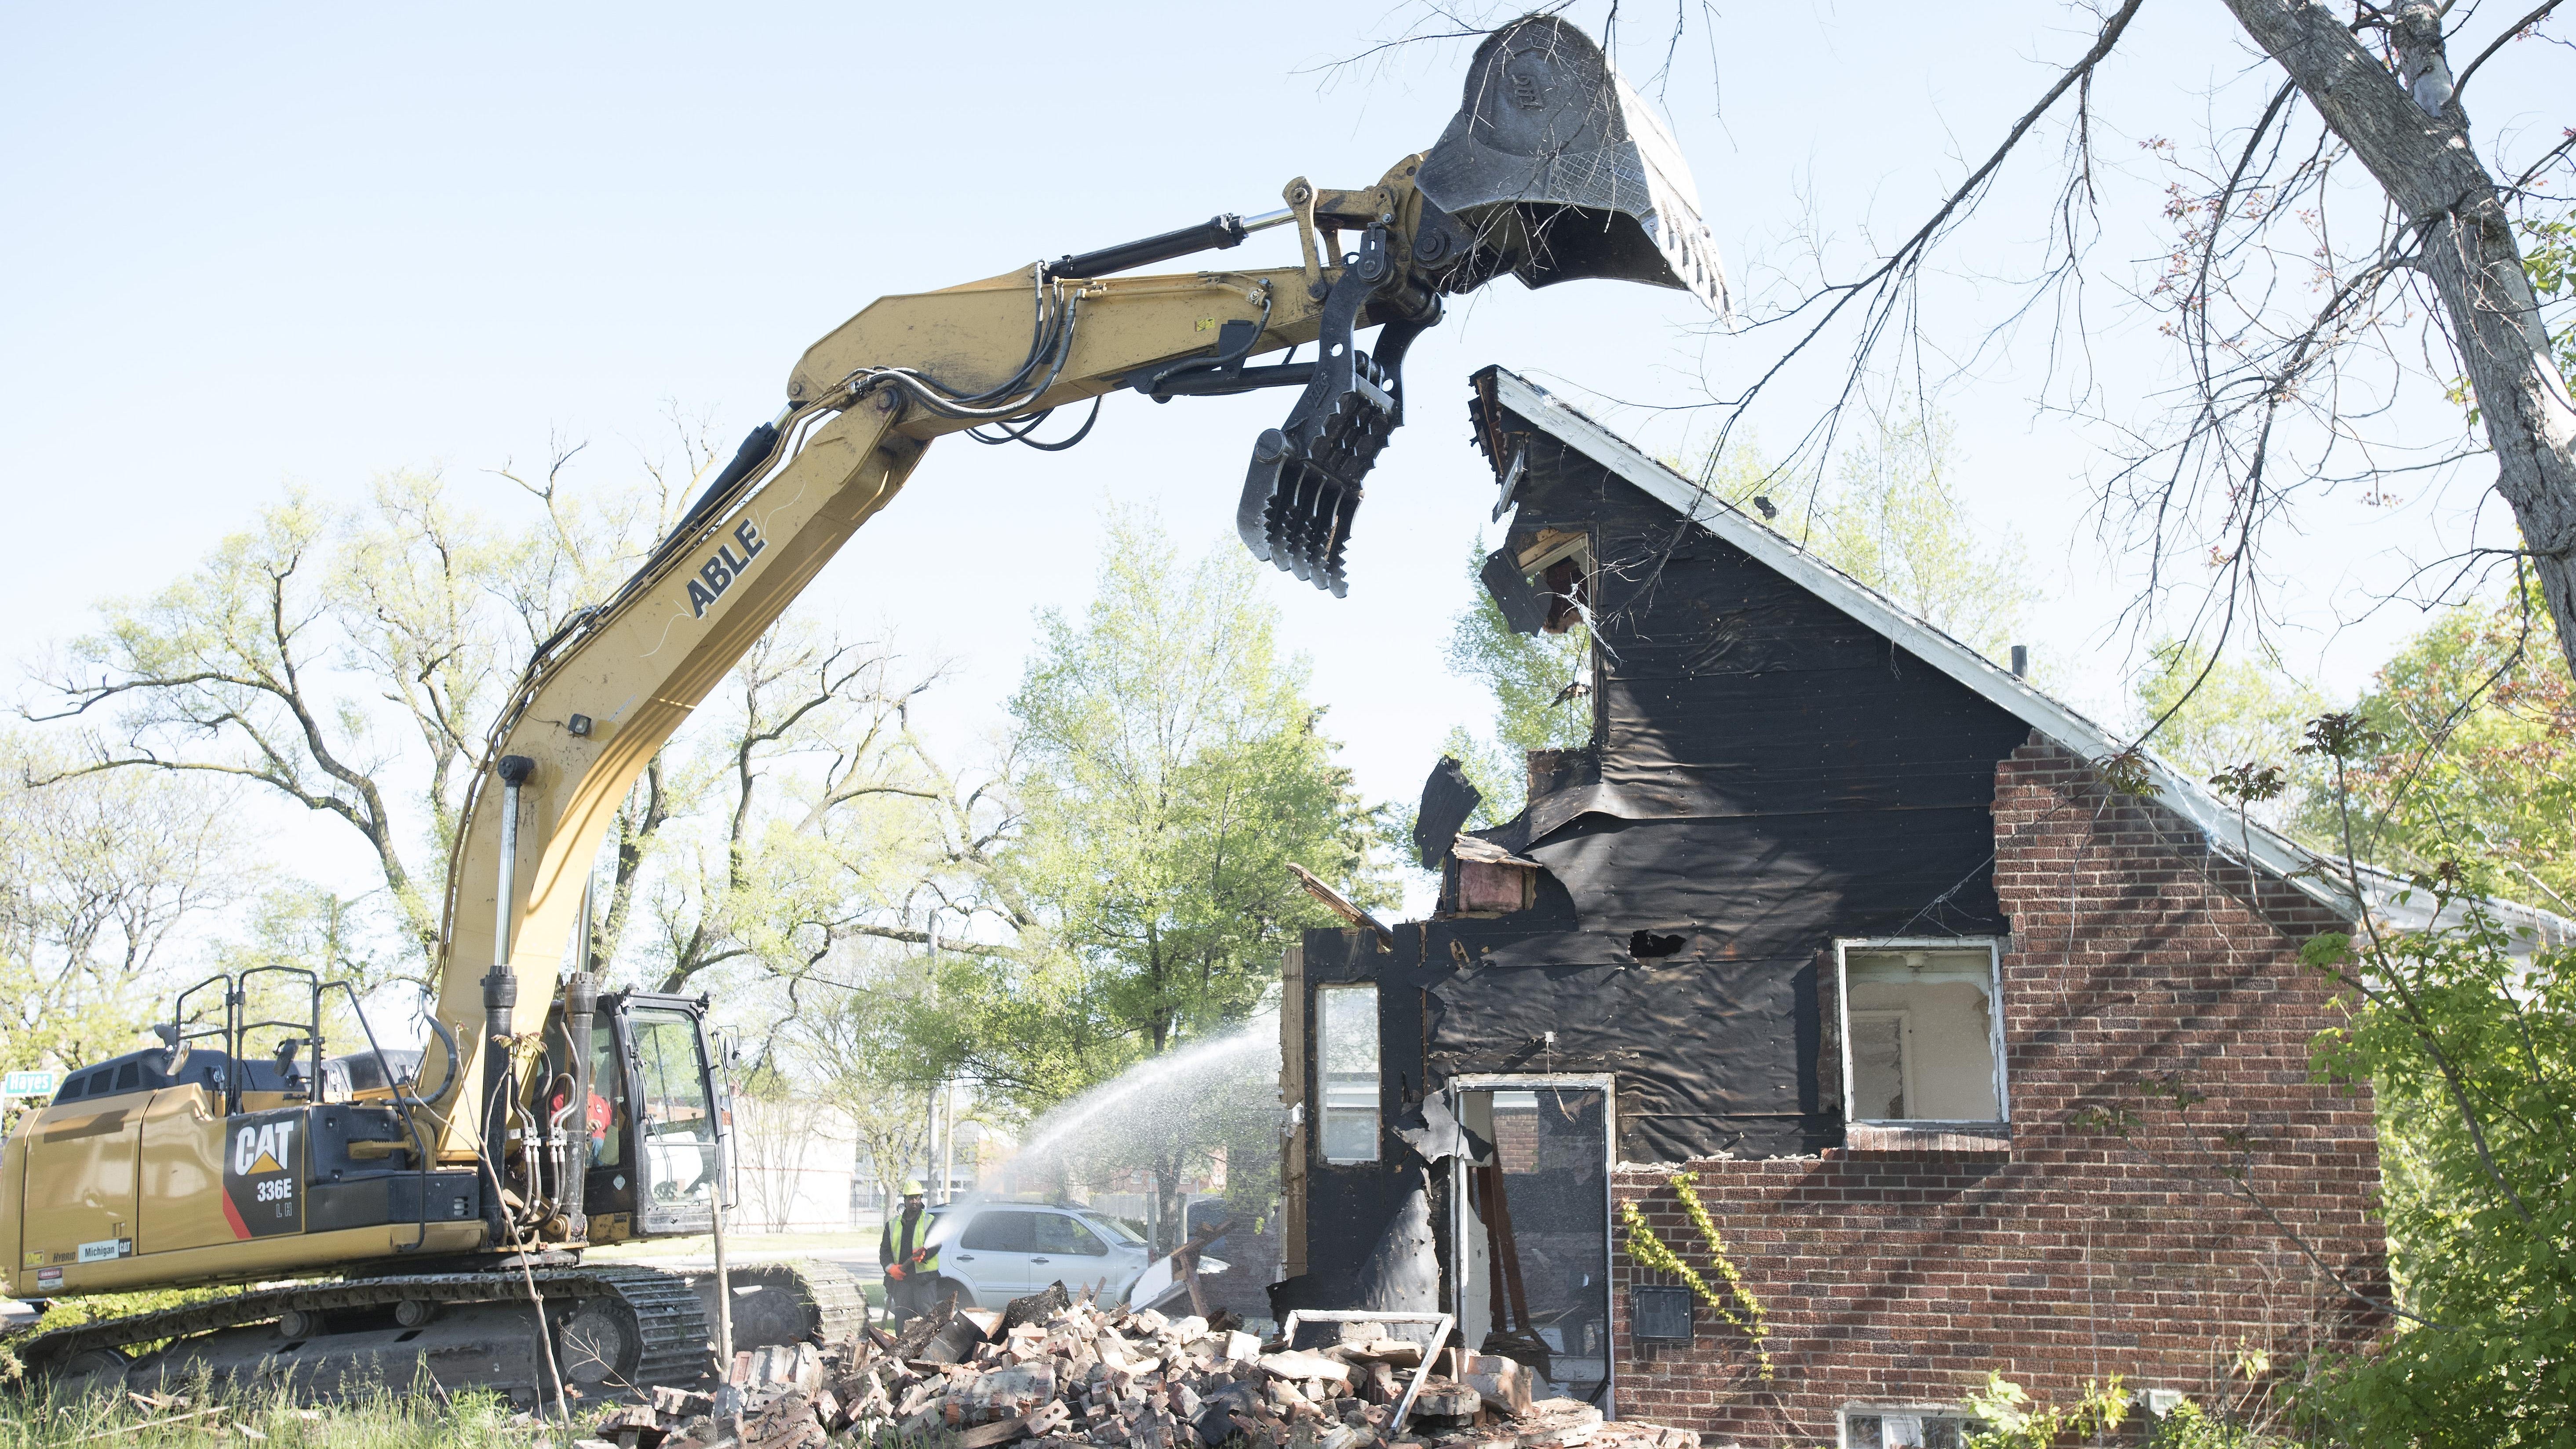 A federal program has awarded more than $173 million since spring 2014 for demolition work in Detroit.